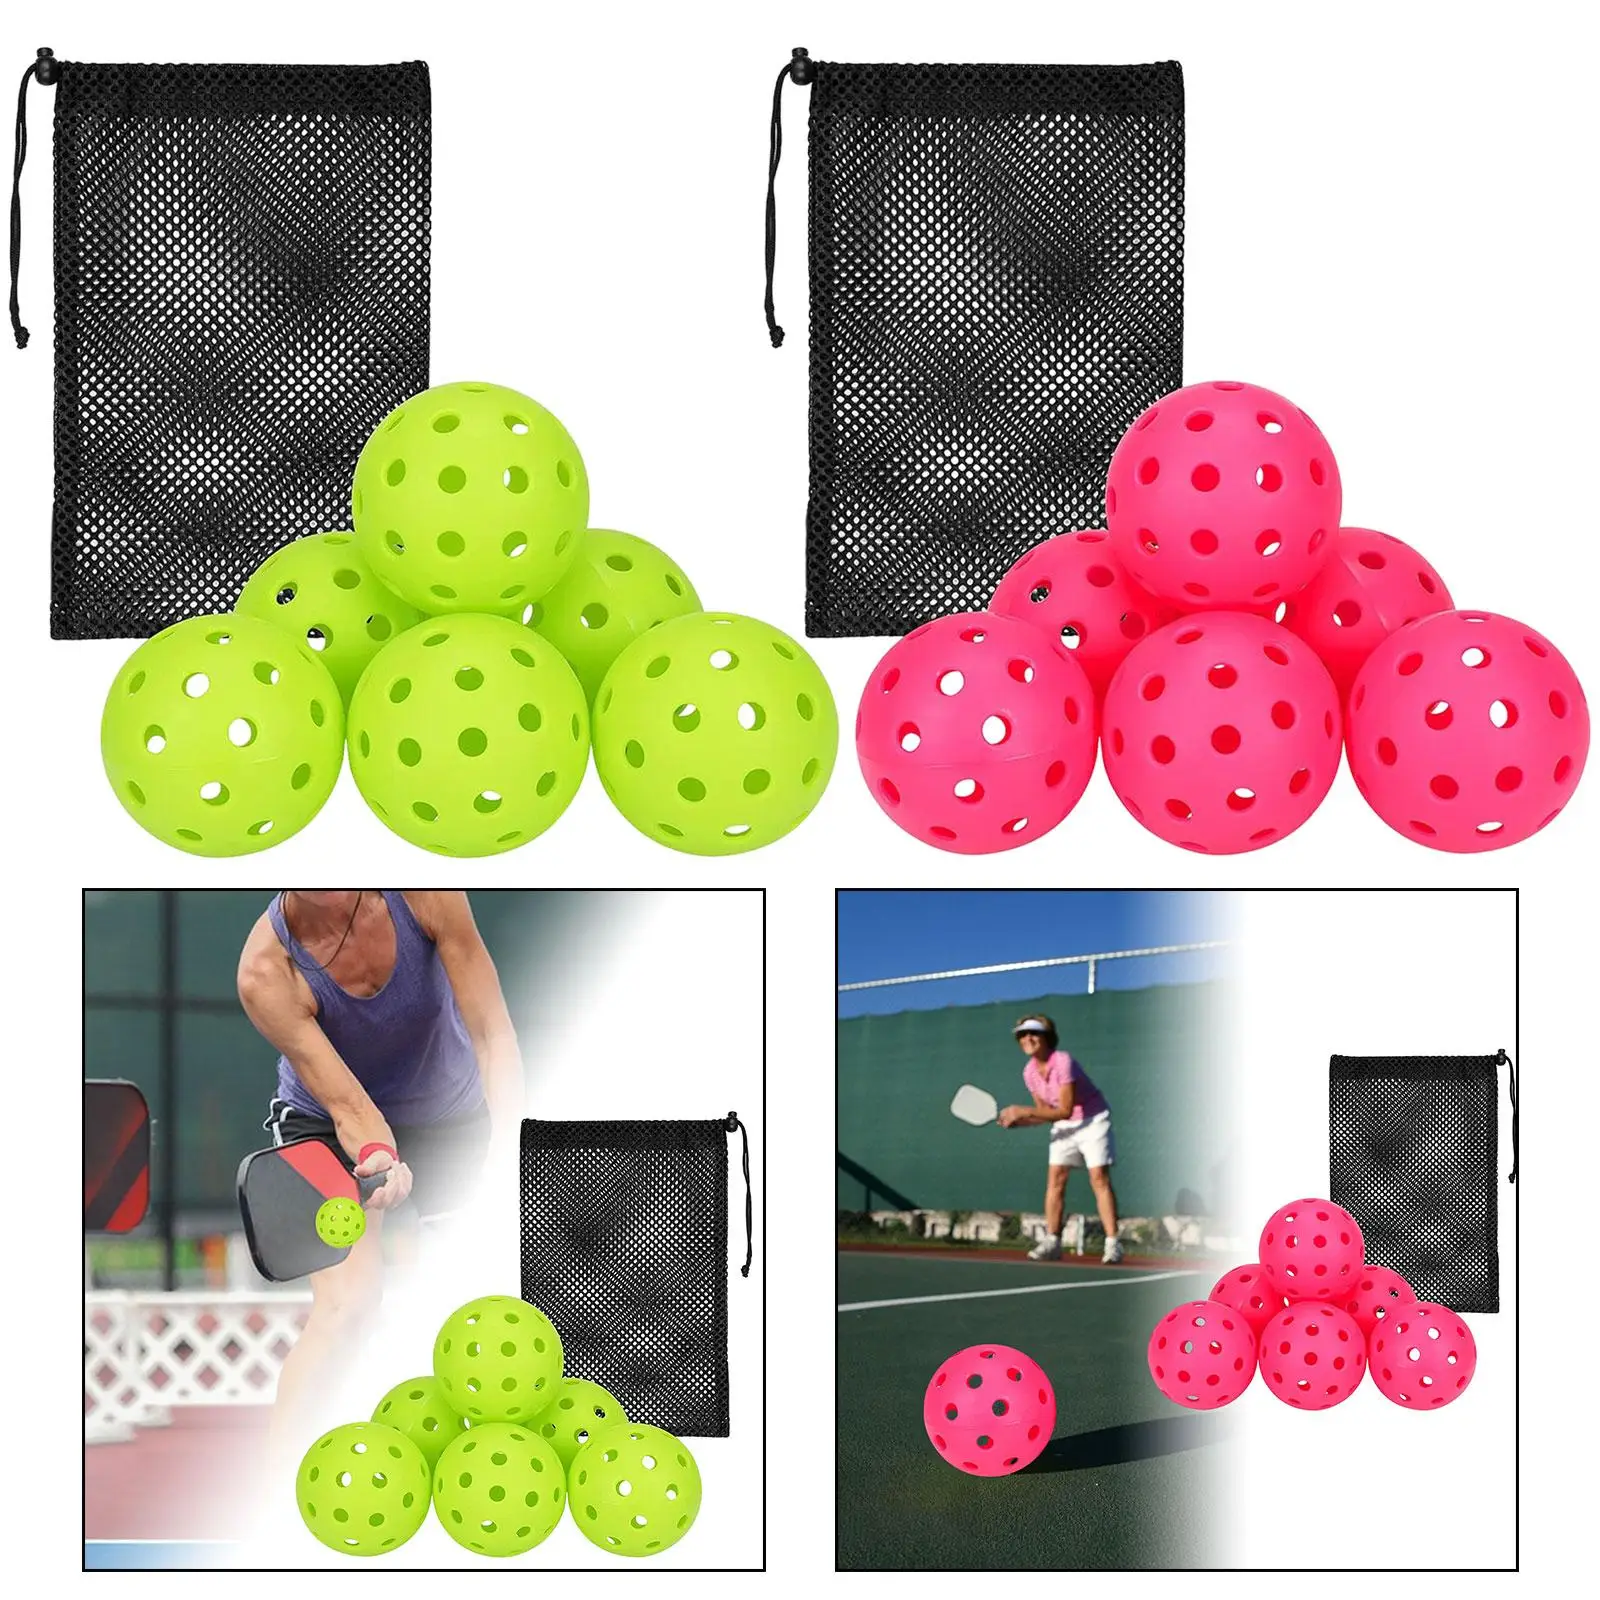 6 Pieces 40 Holes Pickleball Balls Adult Sporting Goods Professional Official Size Ball for Outdoor Courts Tournament Play